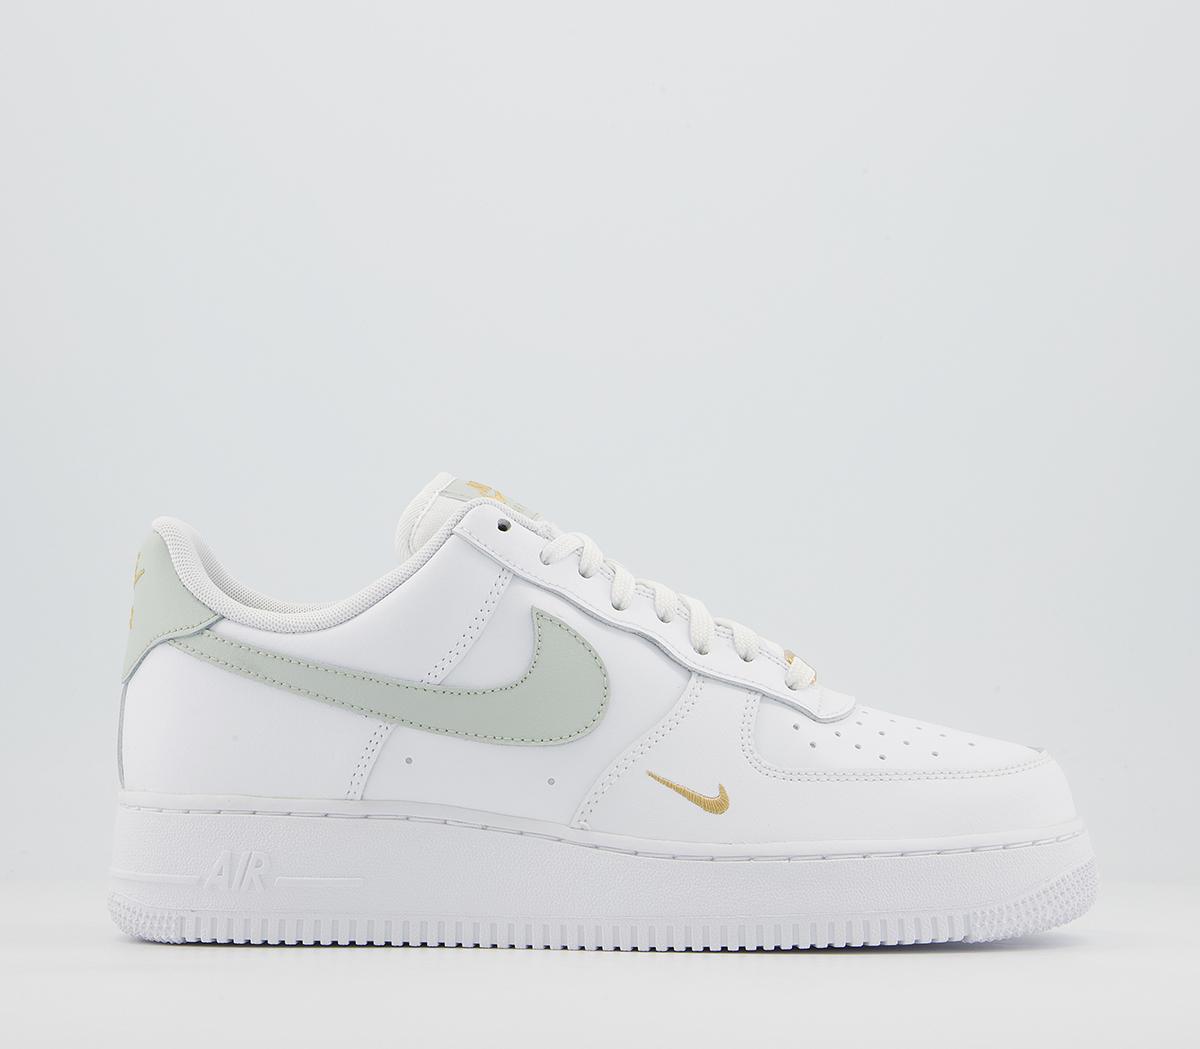 Nike Air Force 1 07 Trainers White Light Silver - Nike Air Force 1